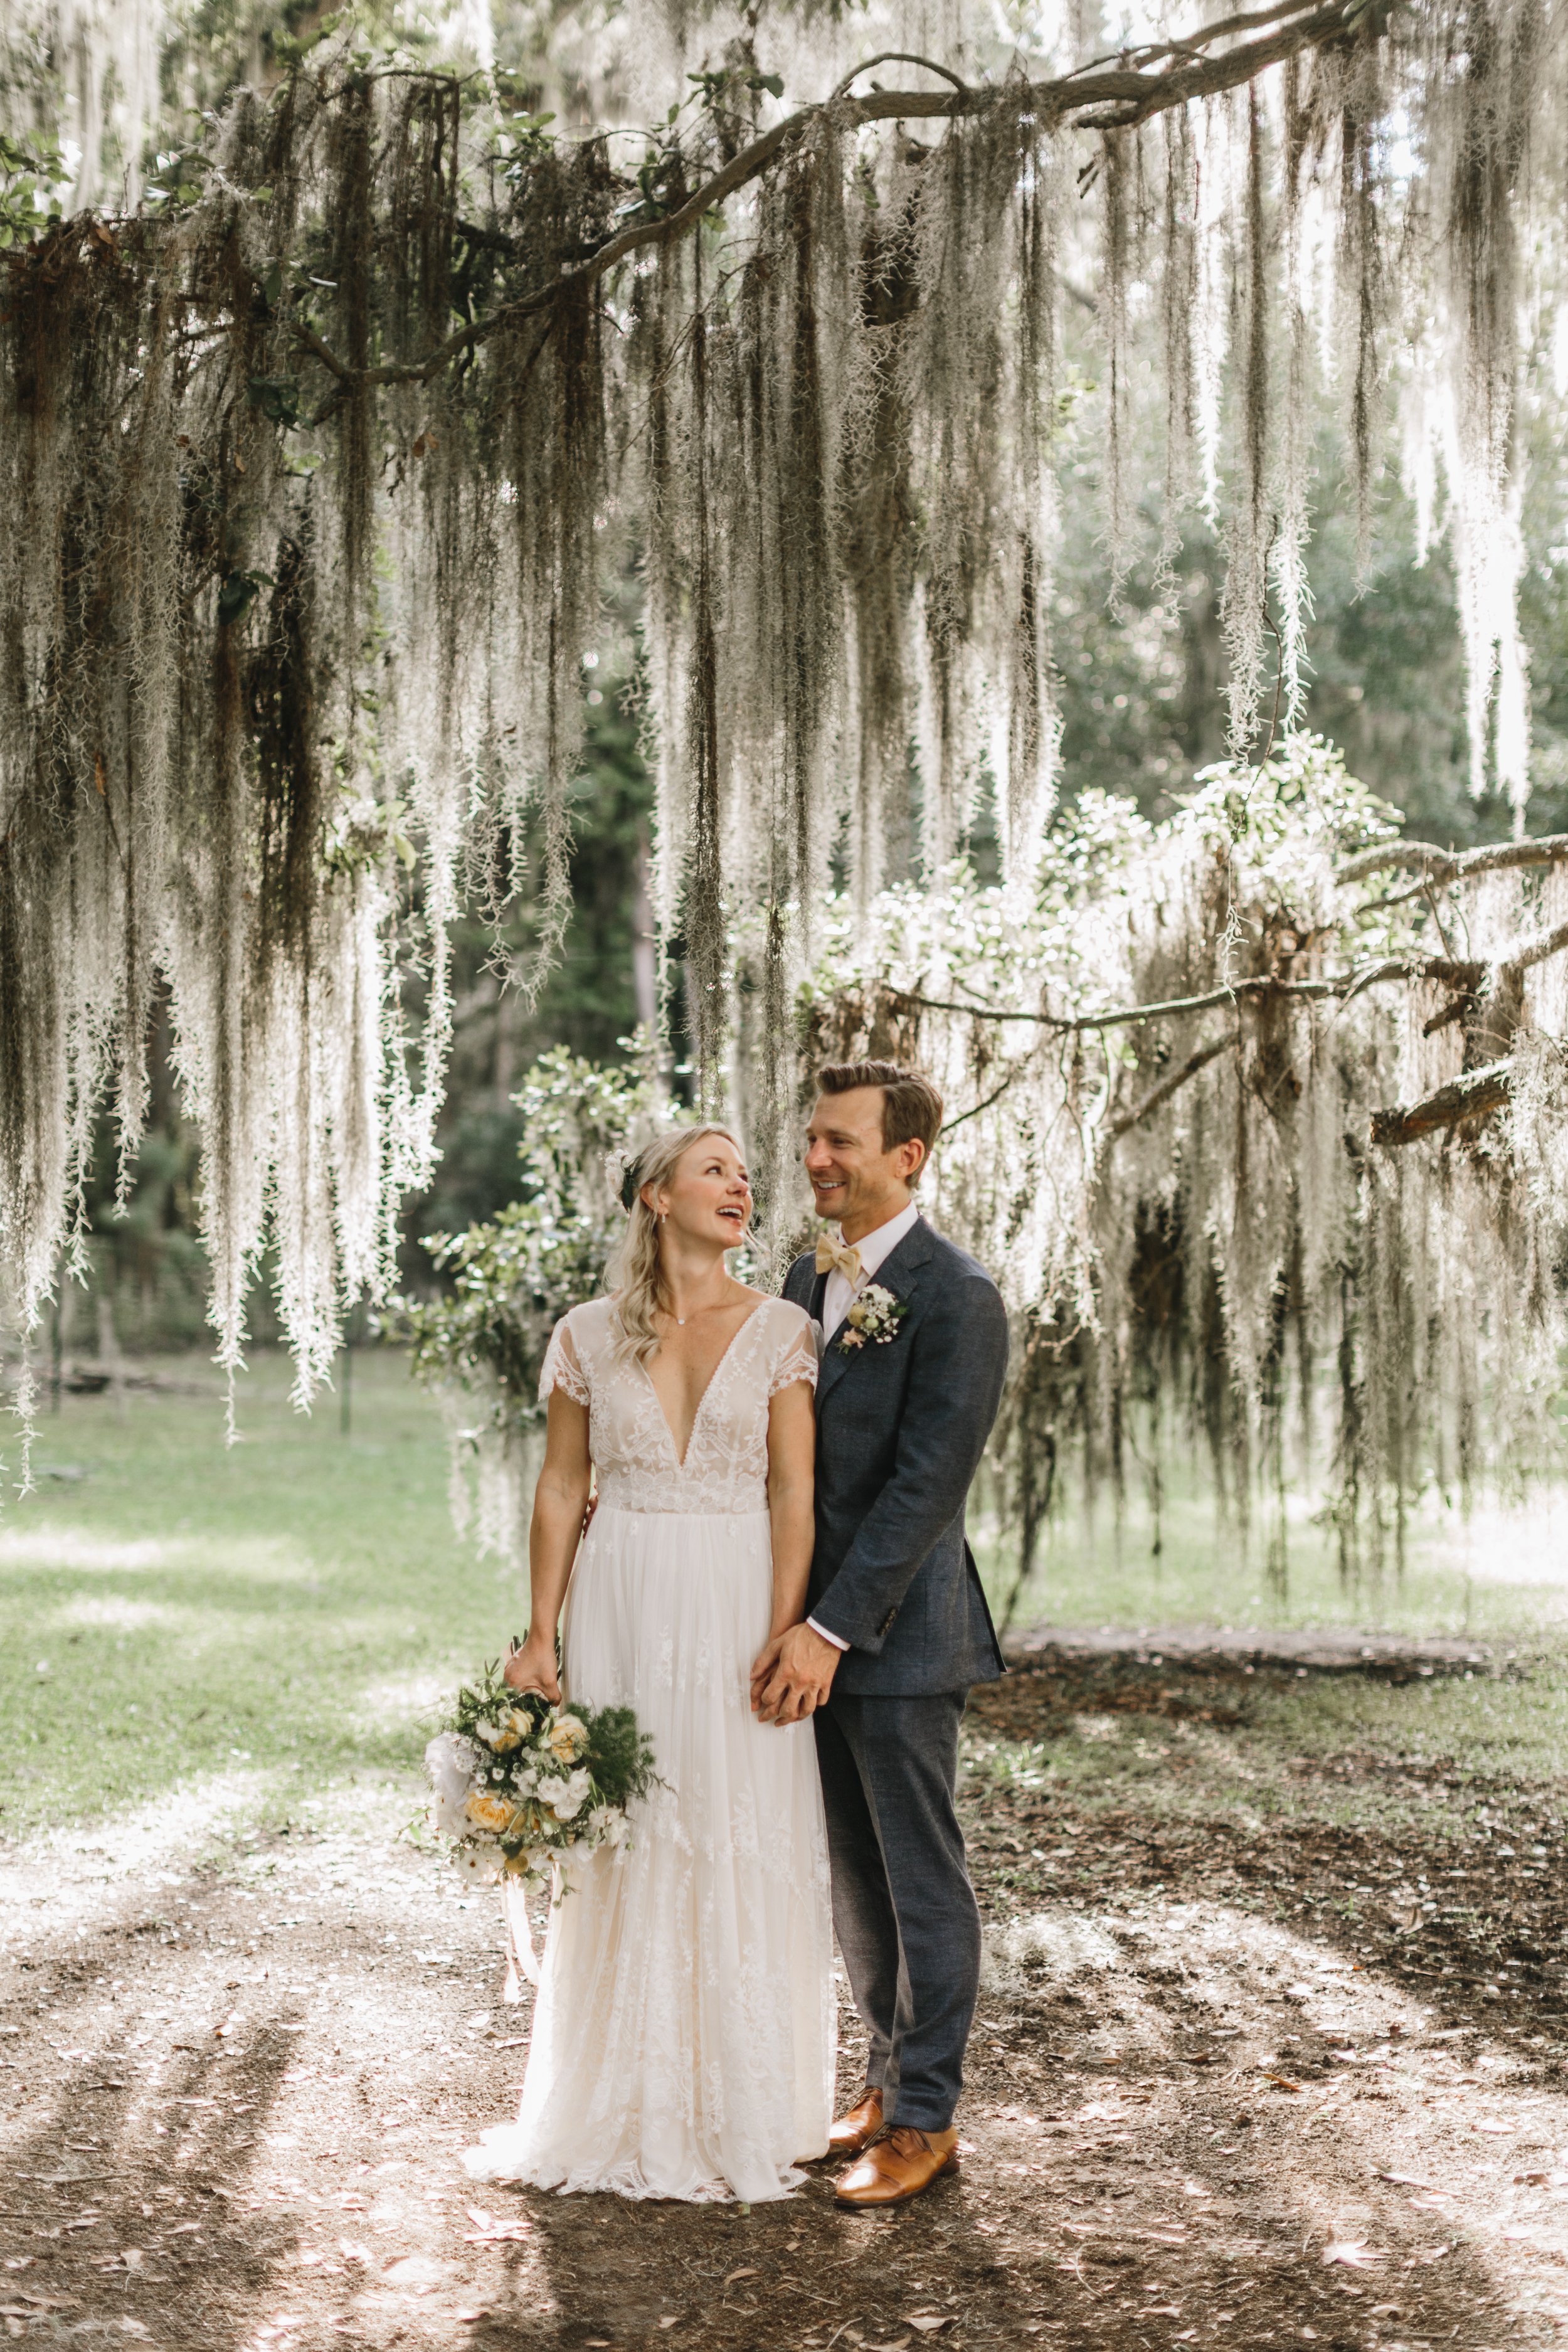 ivory-and-beau-wedding-and-florals-southern-wedding-savannah-florist-savannah-wedding-savannah-wedding-planner-the-wyld-dock-bar-historic-savannah-georgia-wedding-flowers-wedding-blog-wedding-inspiration-LAUREN+NICK_WEDDING-45.jpg